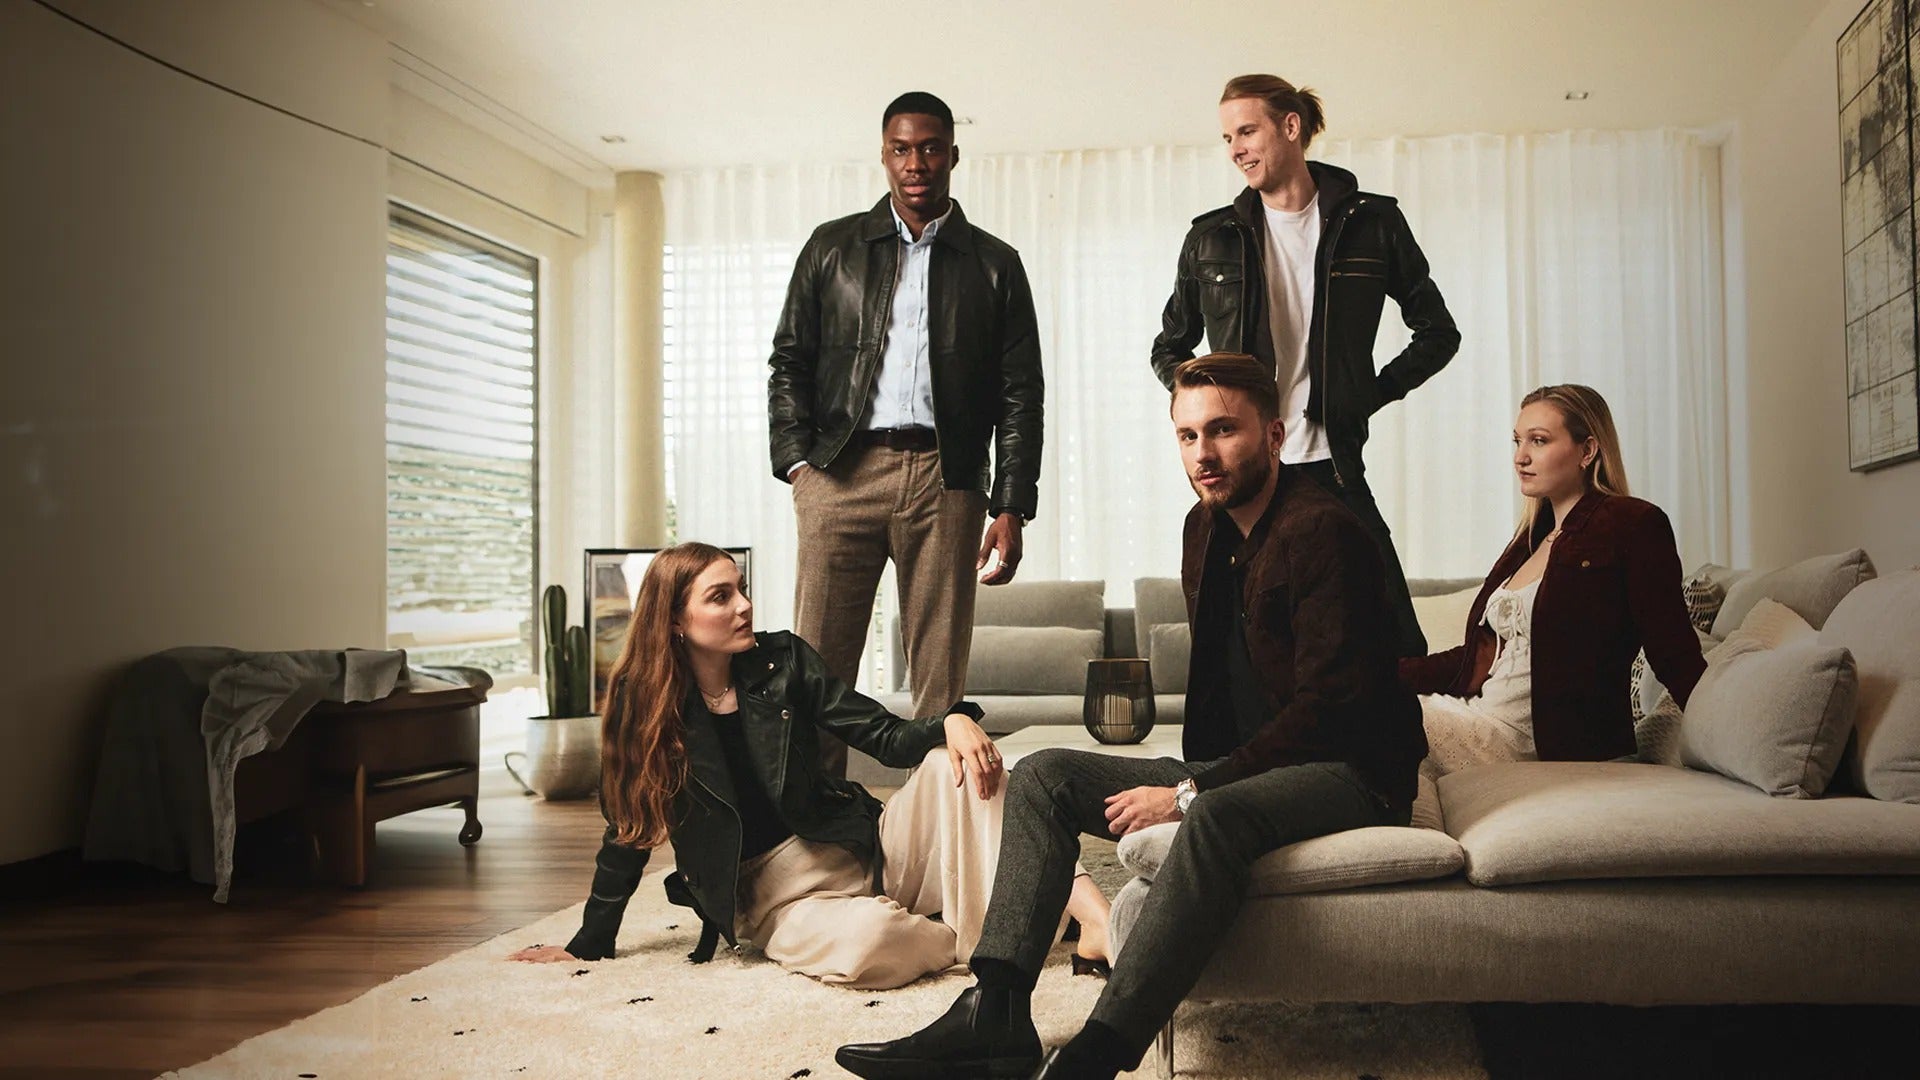 Indulge in the finest leather clothing crafted by skilled artisans. Dick's leather apparel combines unrivaled quality with modern, fashion-forward designs. Shop now.